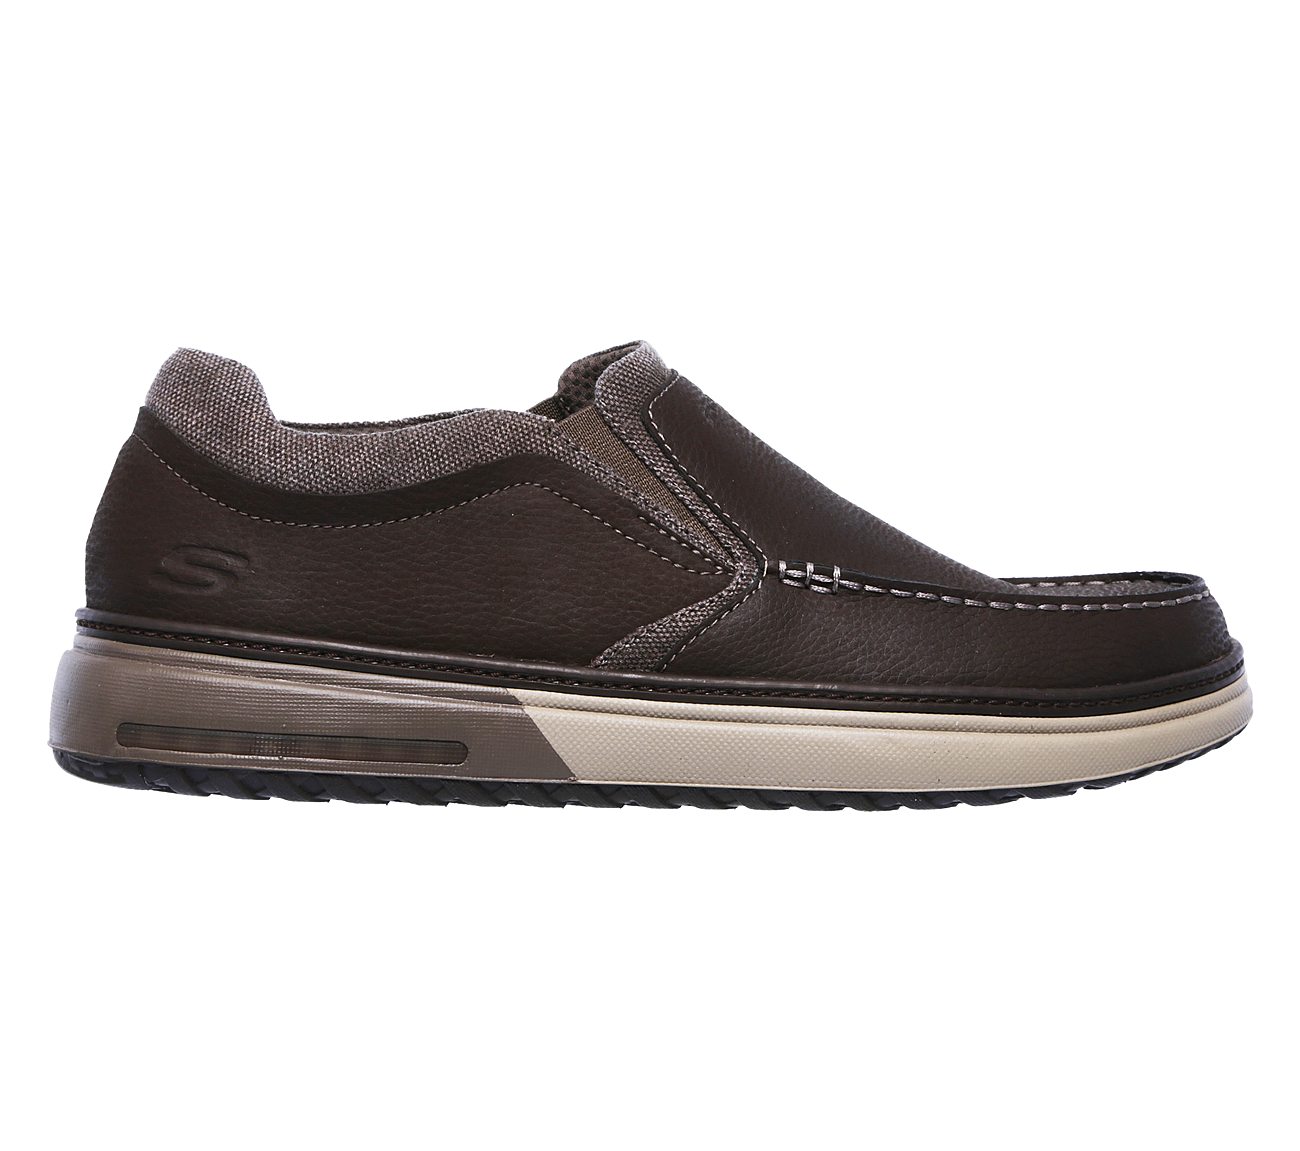 Buy SKECHERS Folten - Rison USA Casuals Shoes